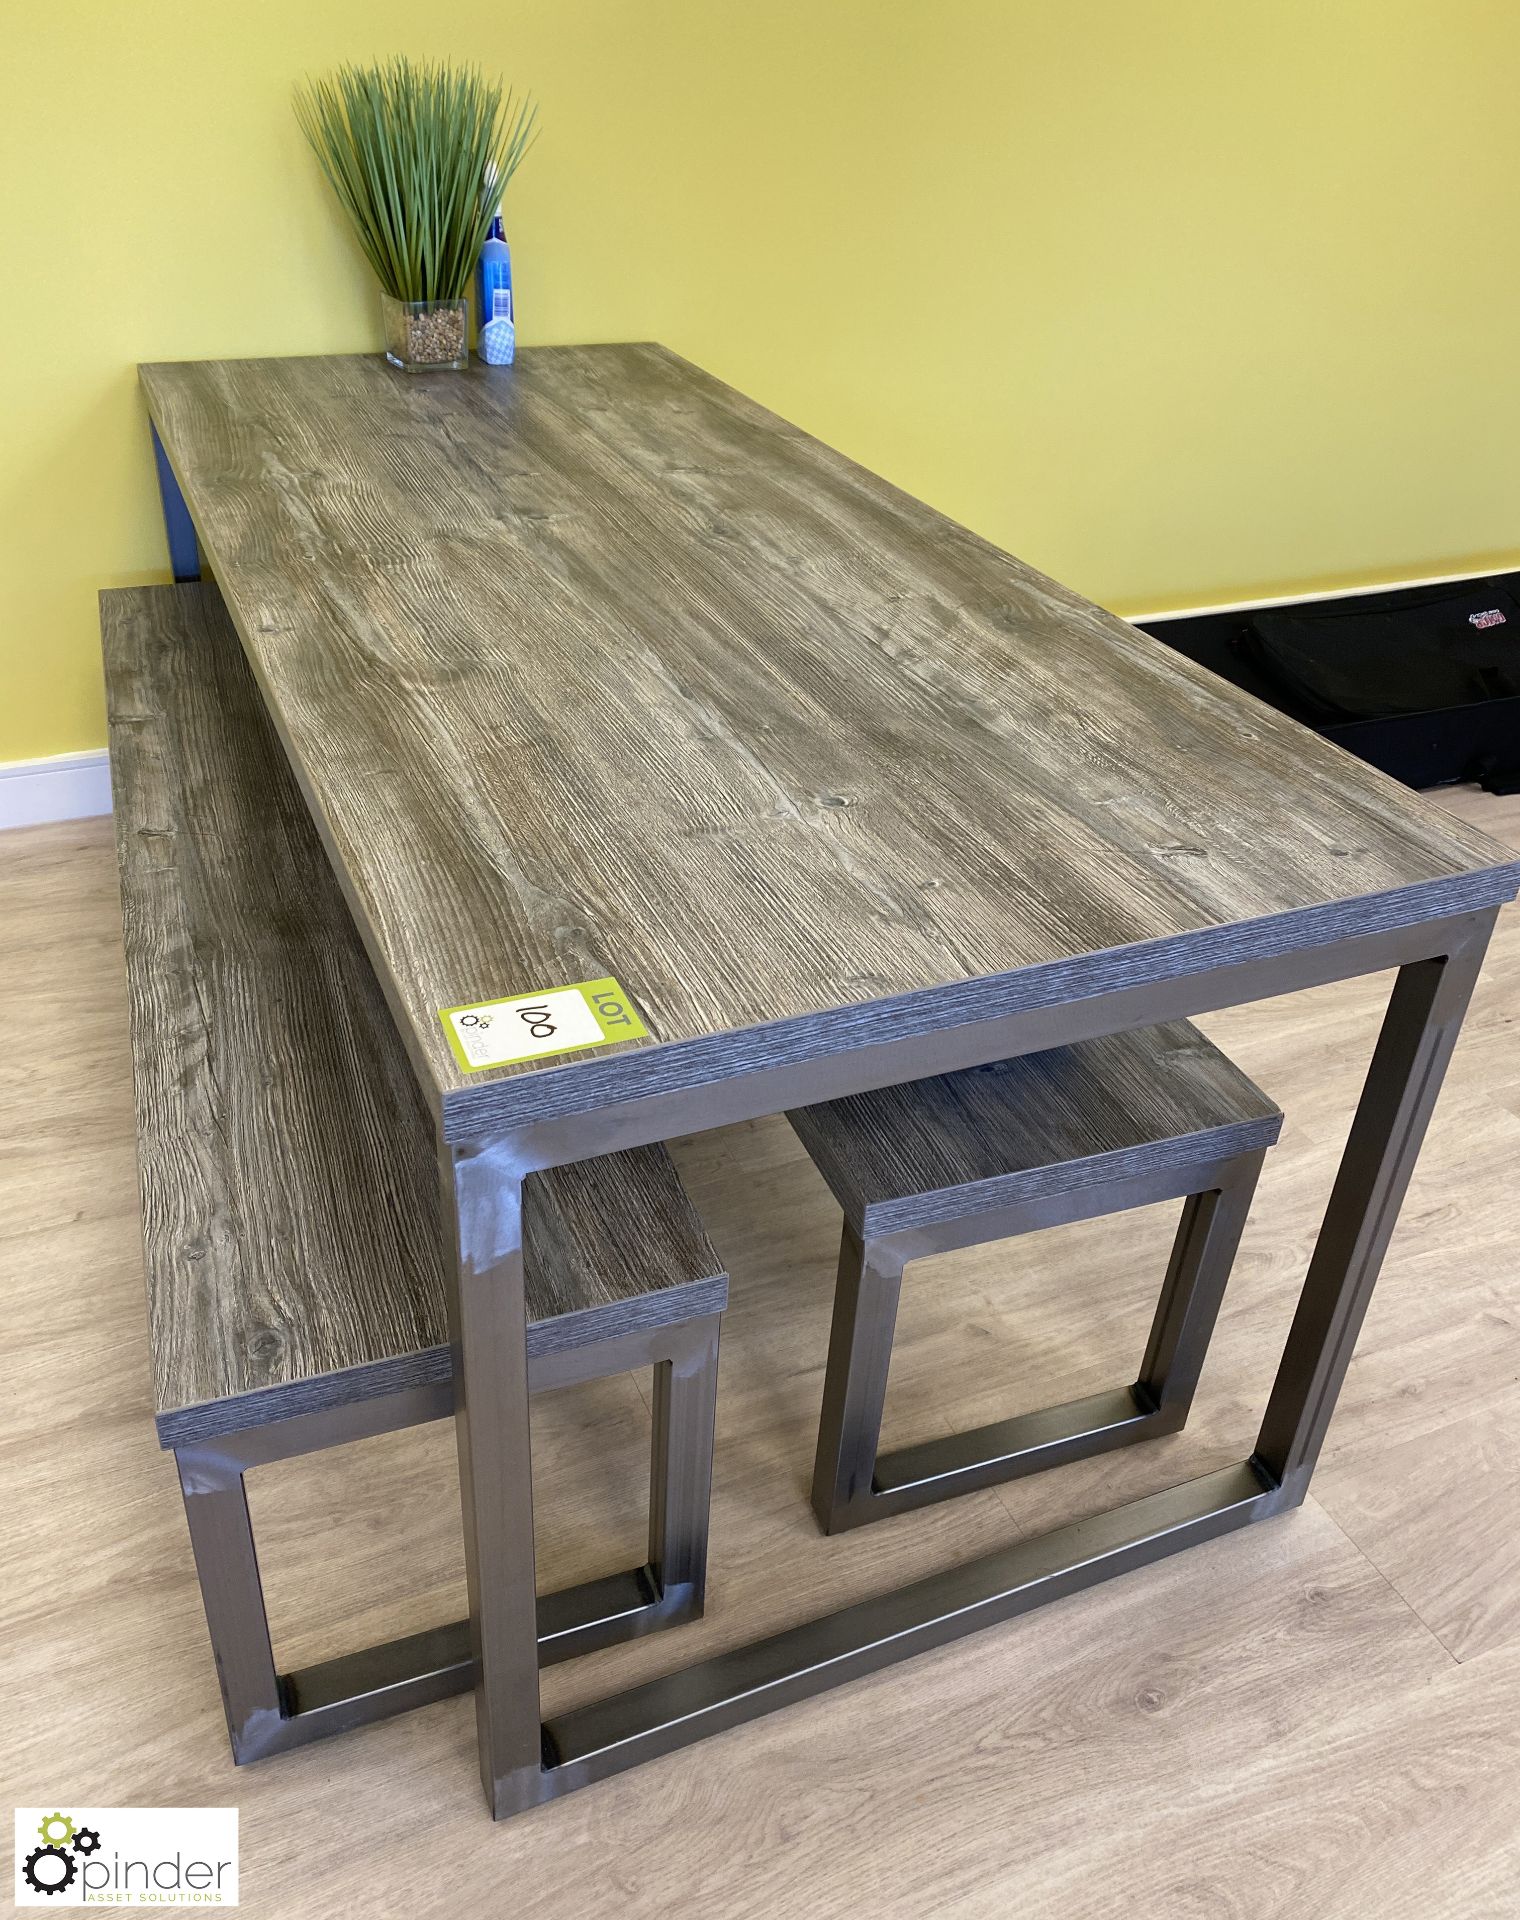 Stained oak effect Dining Table, 1800mm x 800mm x 720mm, with 2 benches (first floor kitchen) - Image 2 of 3